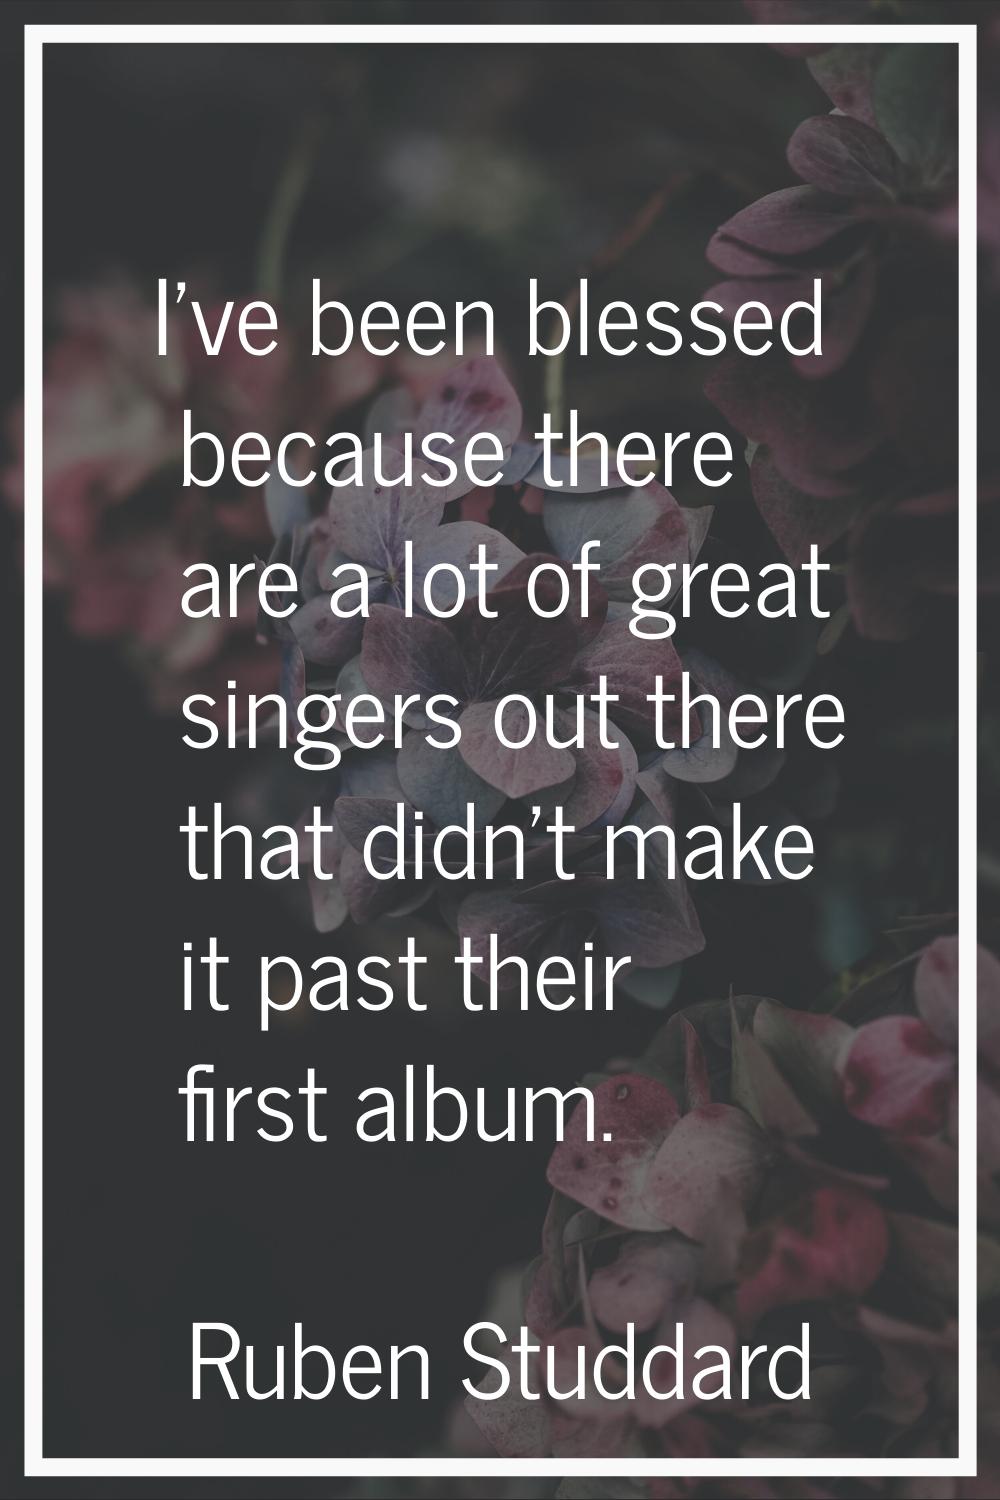 I've been blessed because there are a lot of great singers out there that didn't make it past their